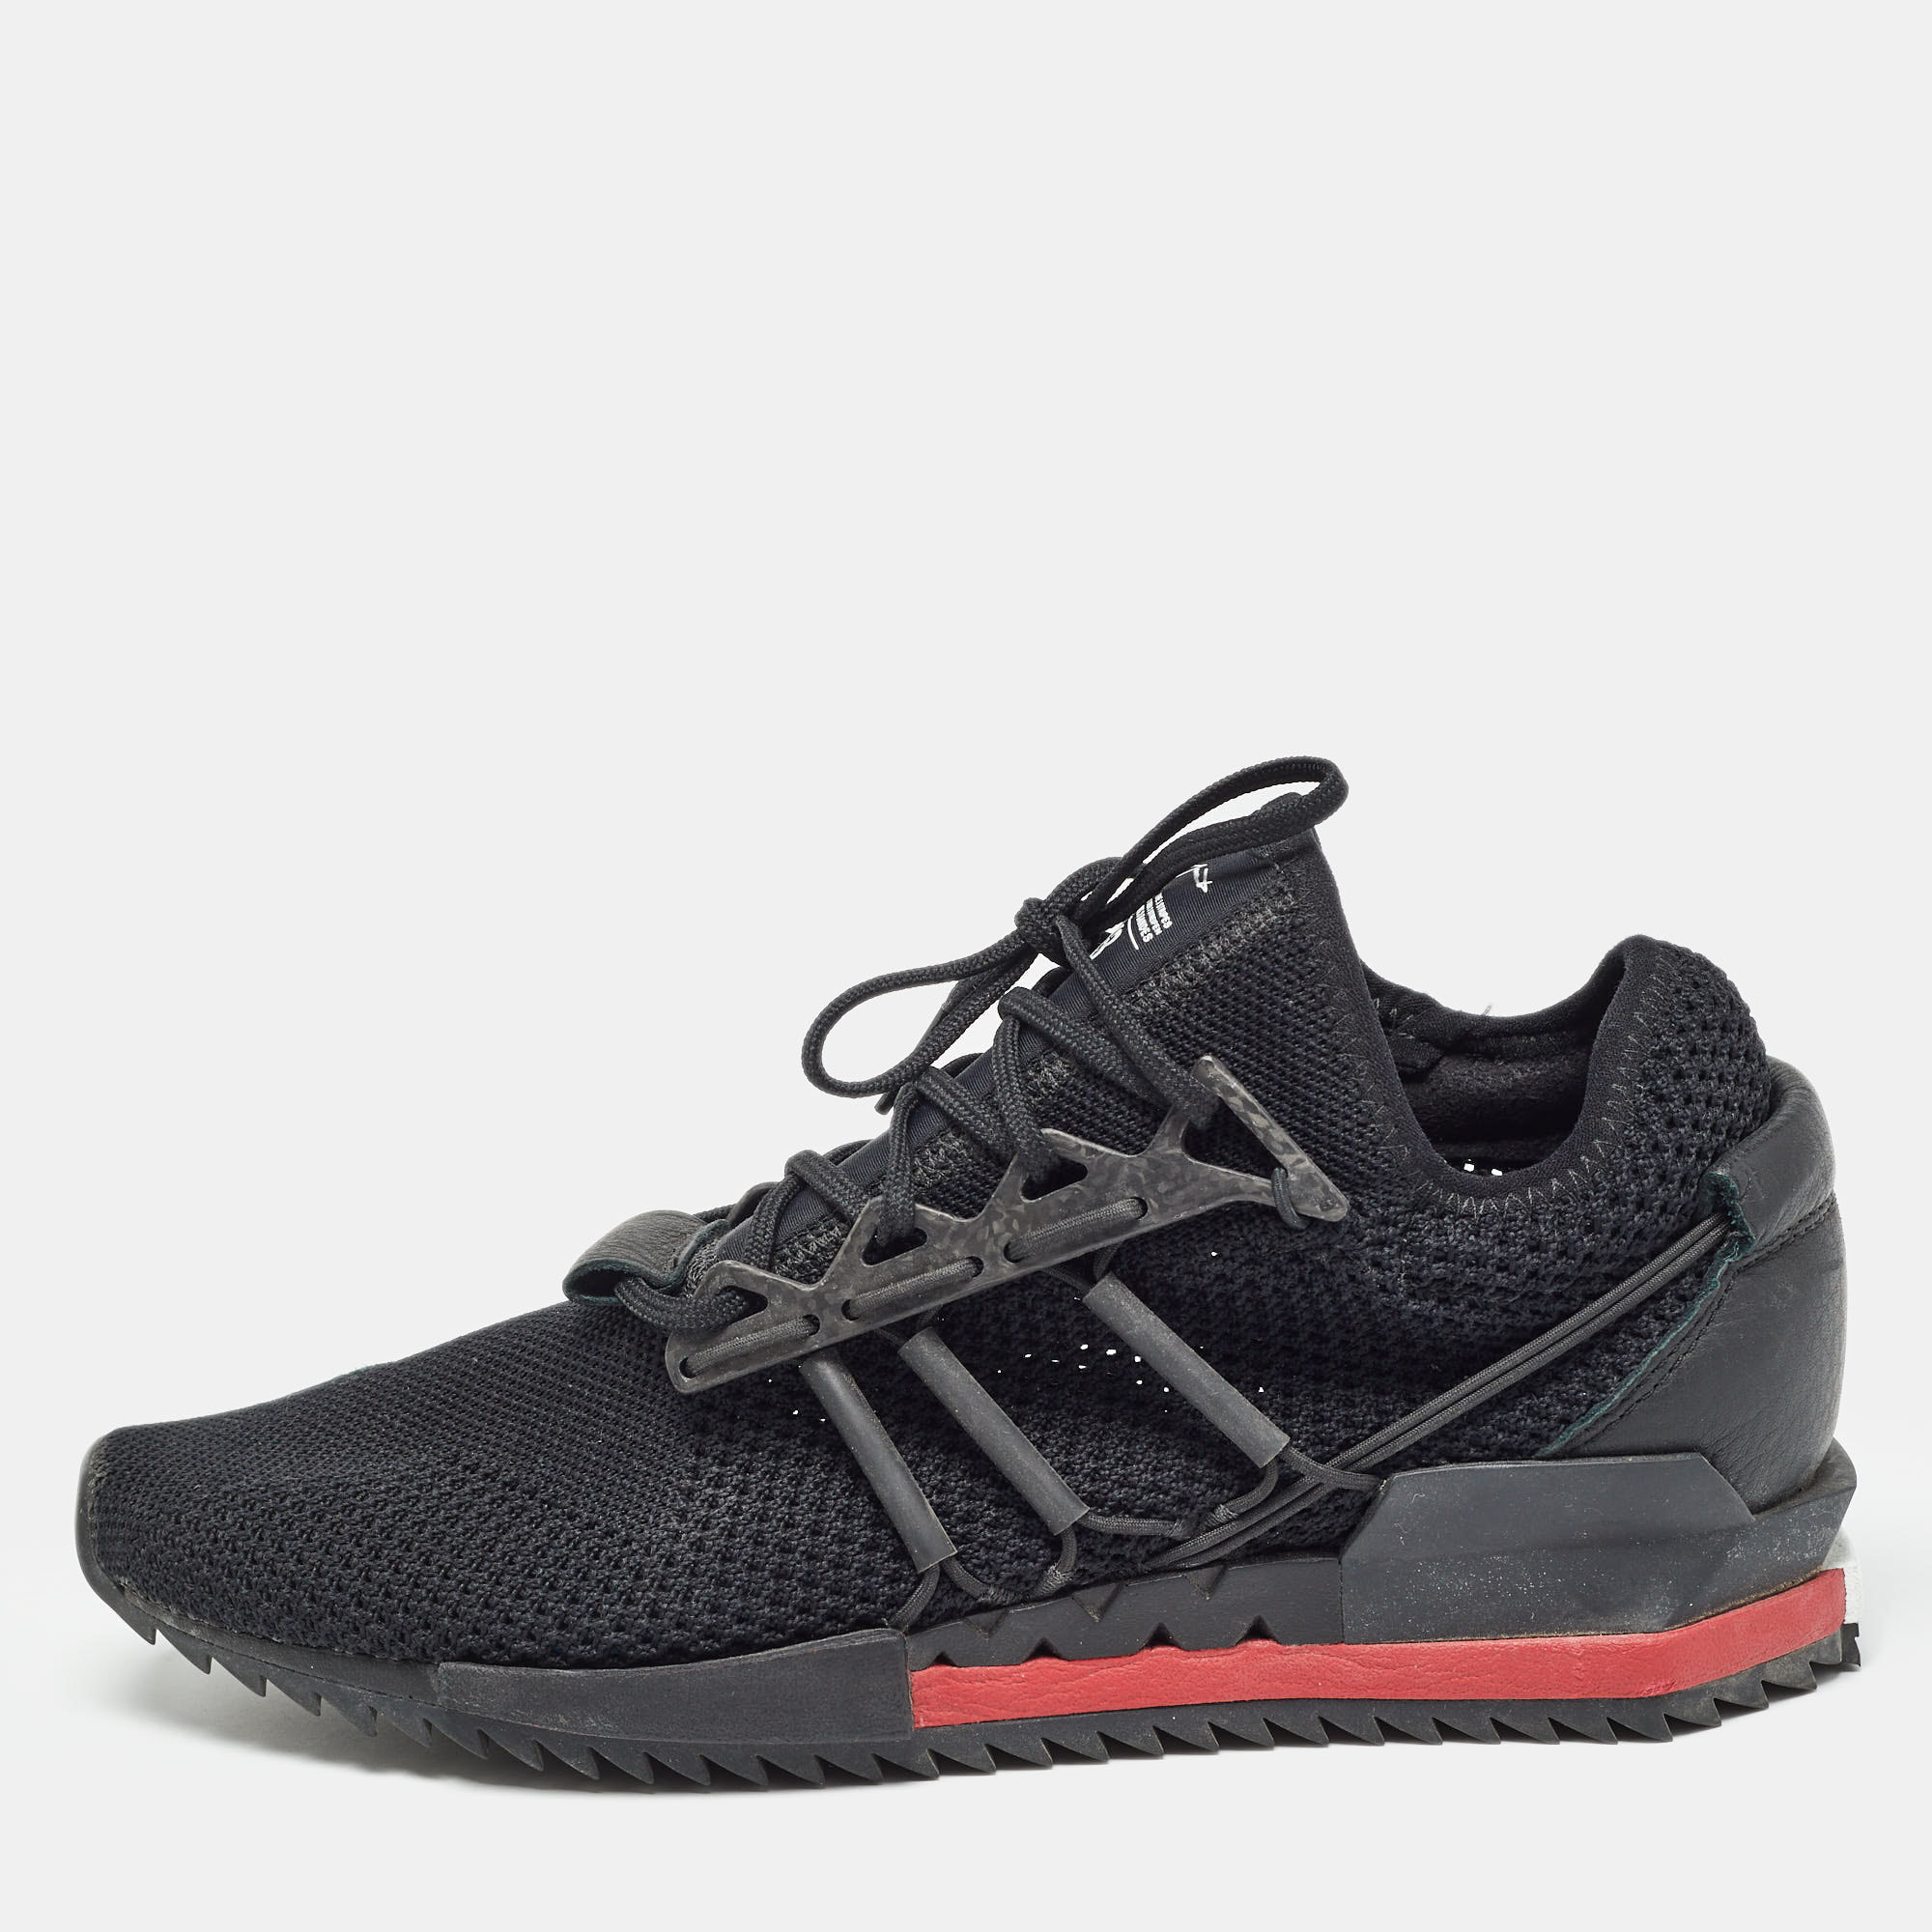 

Adidas Y-3 Black Knit Fabric and Leather Harigane Black Chili Pepper Sneakers Size 42